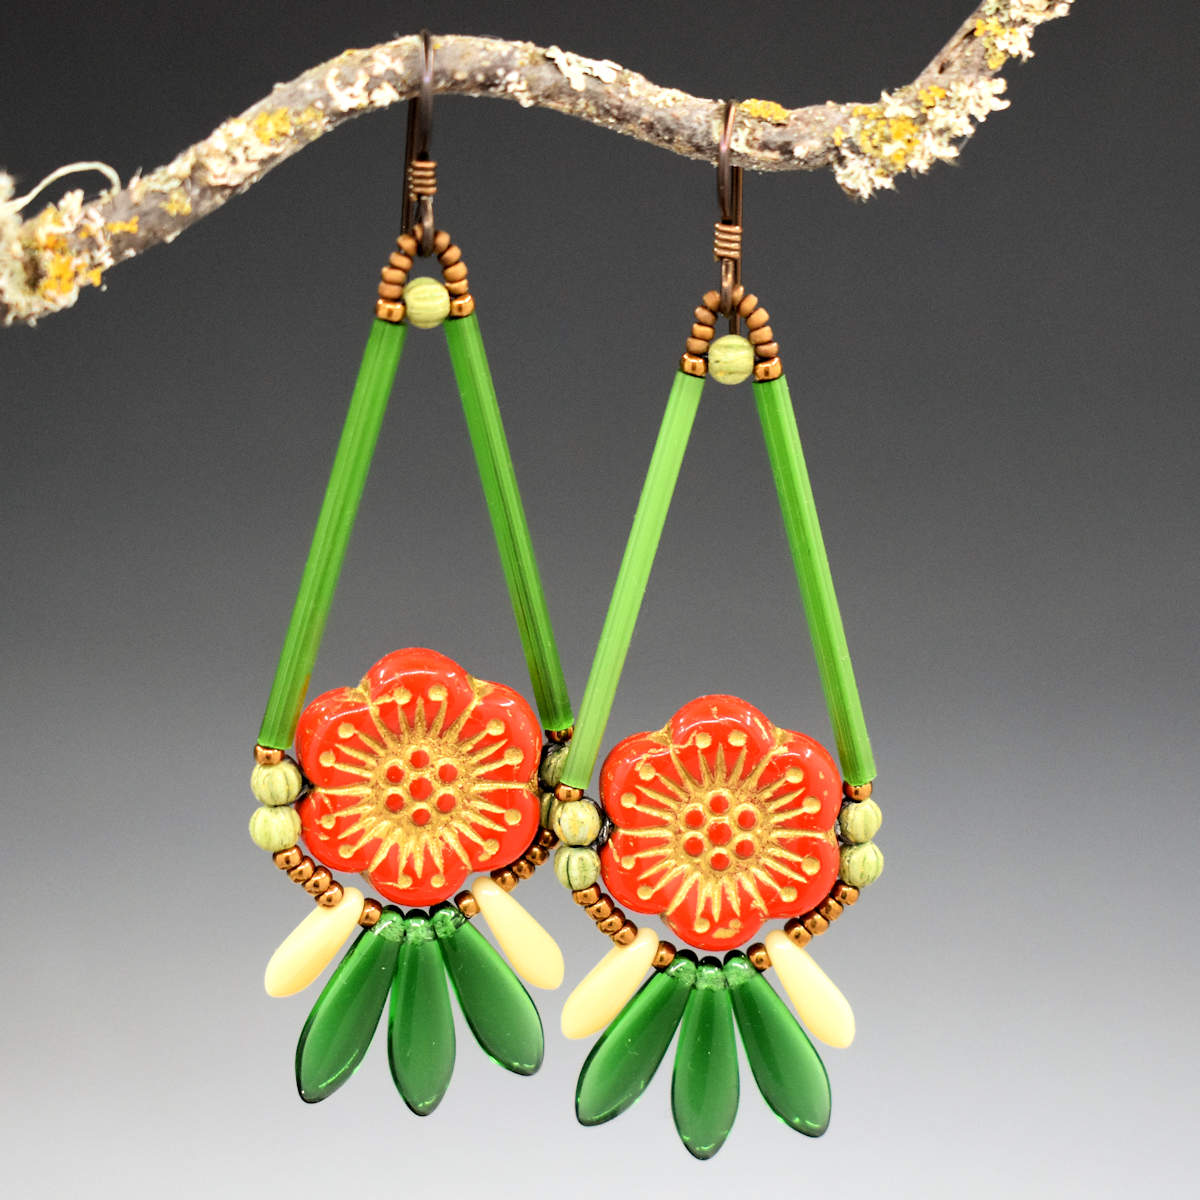 Long green earrings with a red flower center hang from a lichen covered twig. The earrings are shaped like a teardrop with tail feathers at the bottom. The teardrop shape is formed by two long green tube beads and the round part is a warm orange flower with gold embossed details. At the bottom are three transparent green dagger beads with a smaller cream dagger on either side. The earrings have dark ear wires and gold seed bead accents.